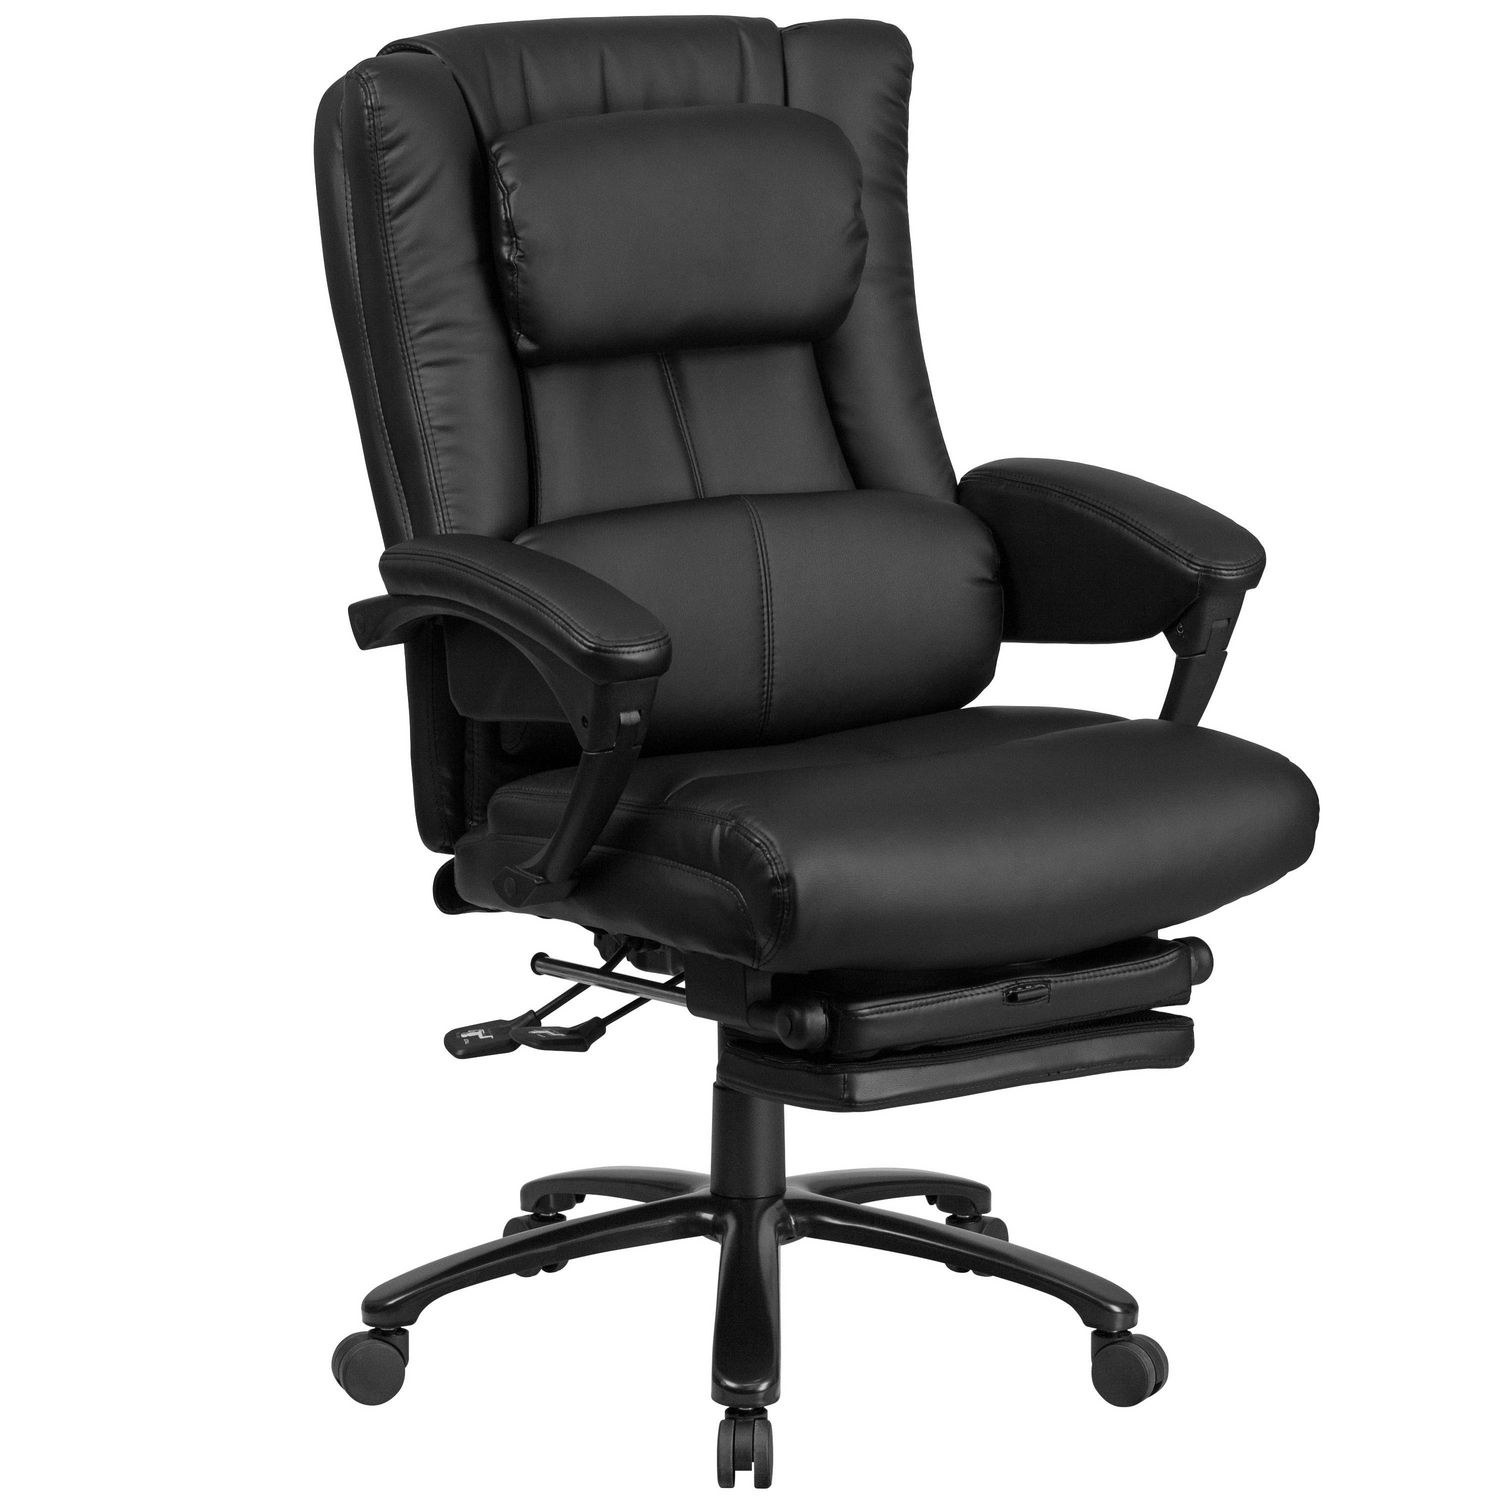 High Back Black Leather Executive Reclining Ergonomic Office Chair